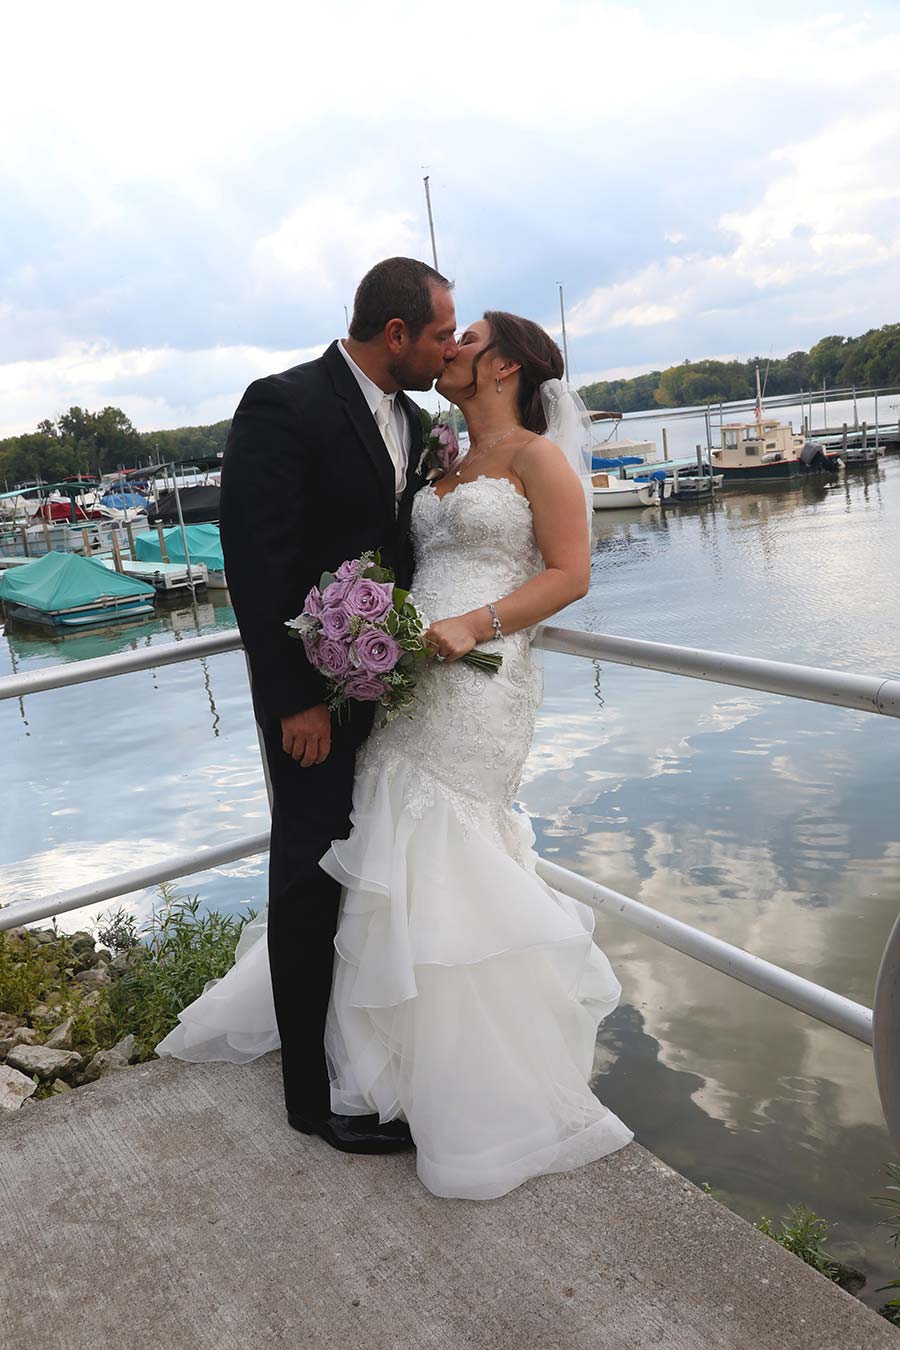 the Perrysburg Marina is a perfect spot for romantic wedding photography